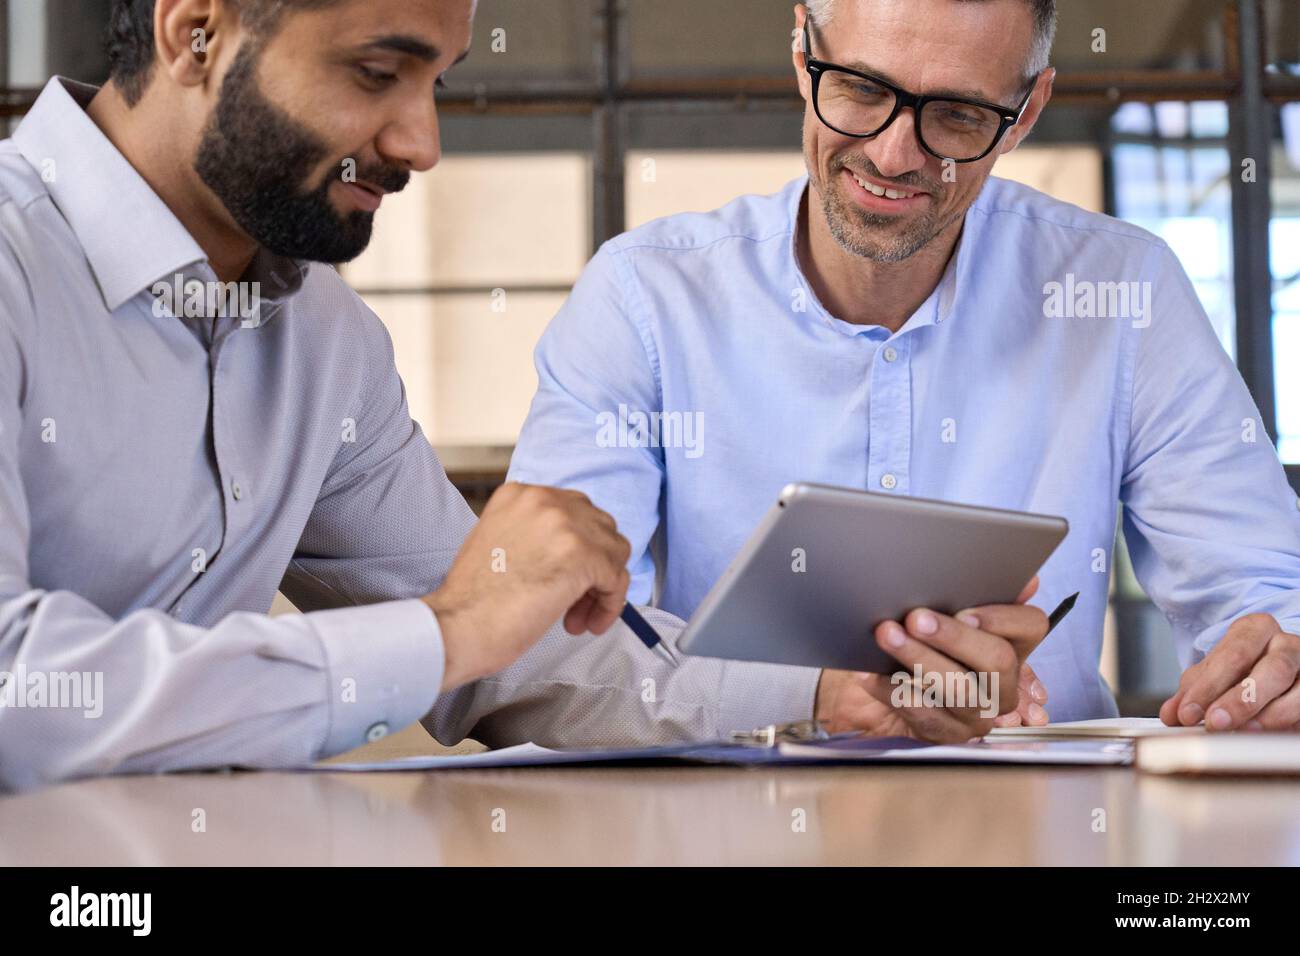 Two happy diverse business men analyzing financial data using digital tablet. Stock Photo